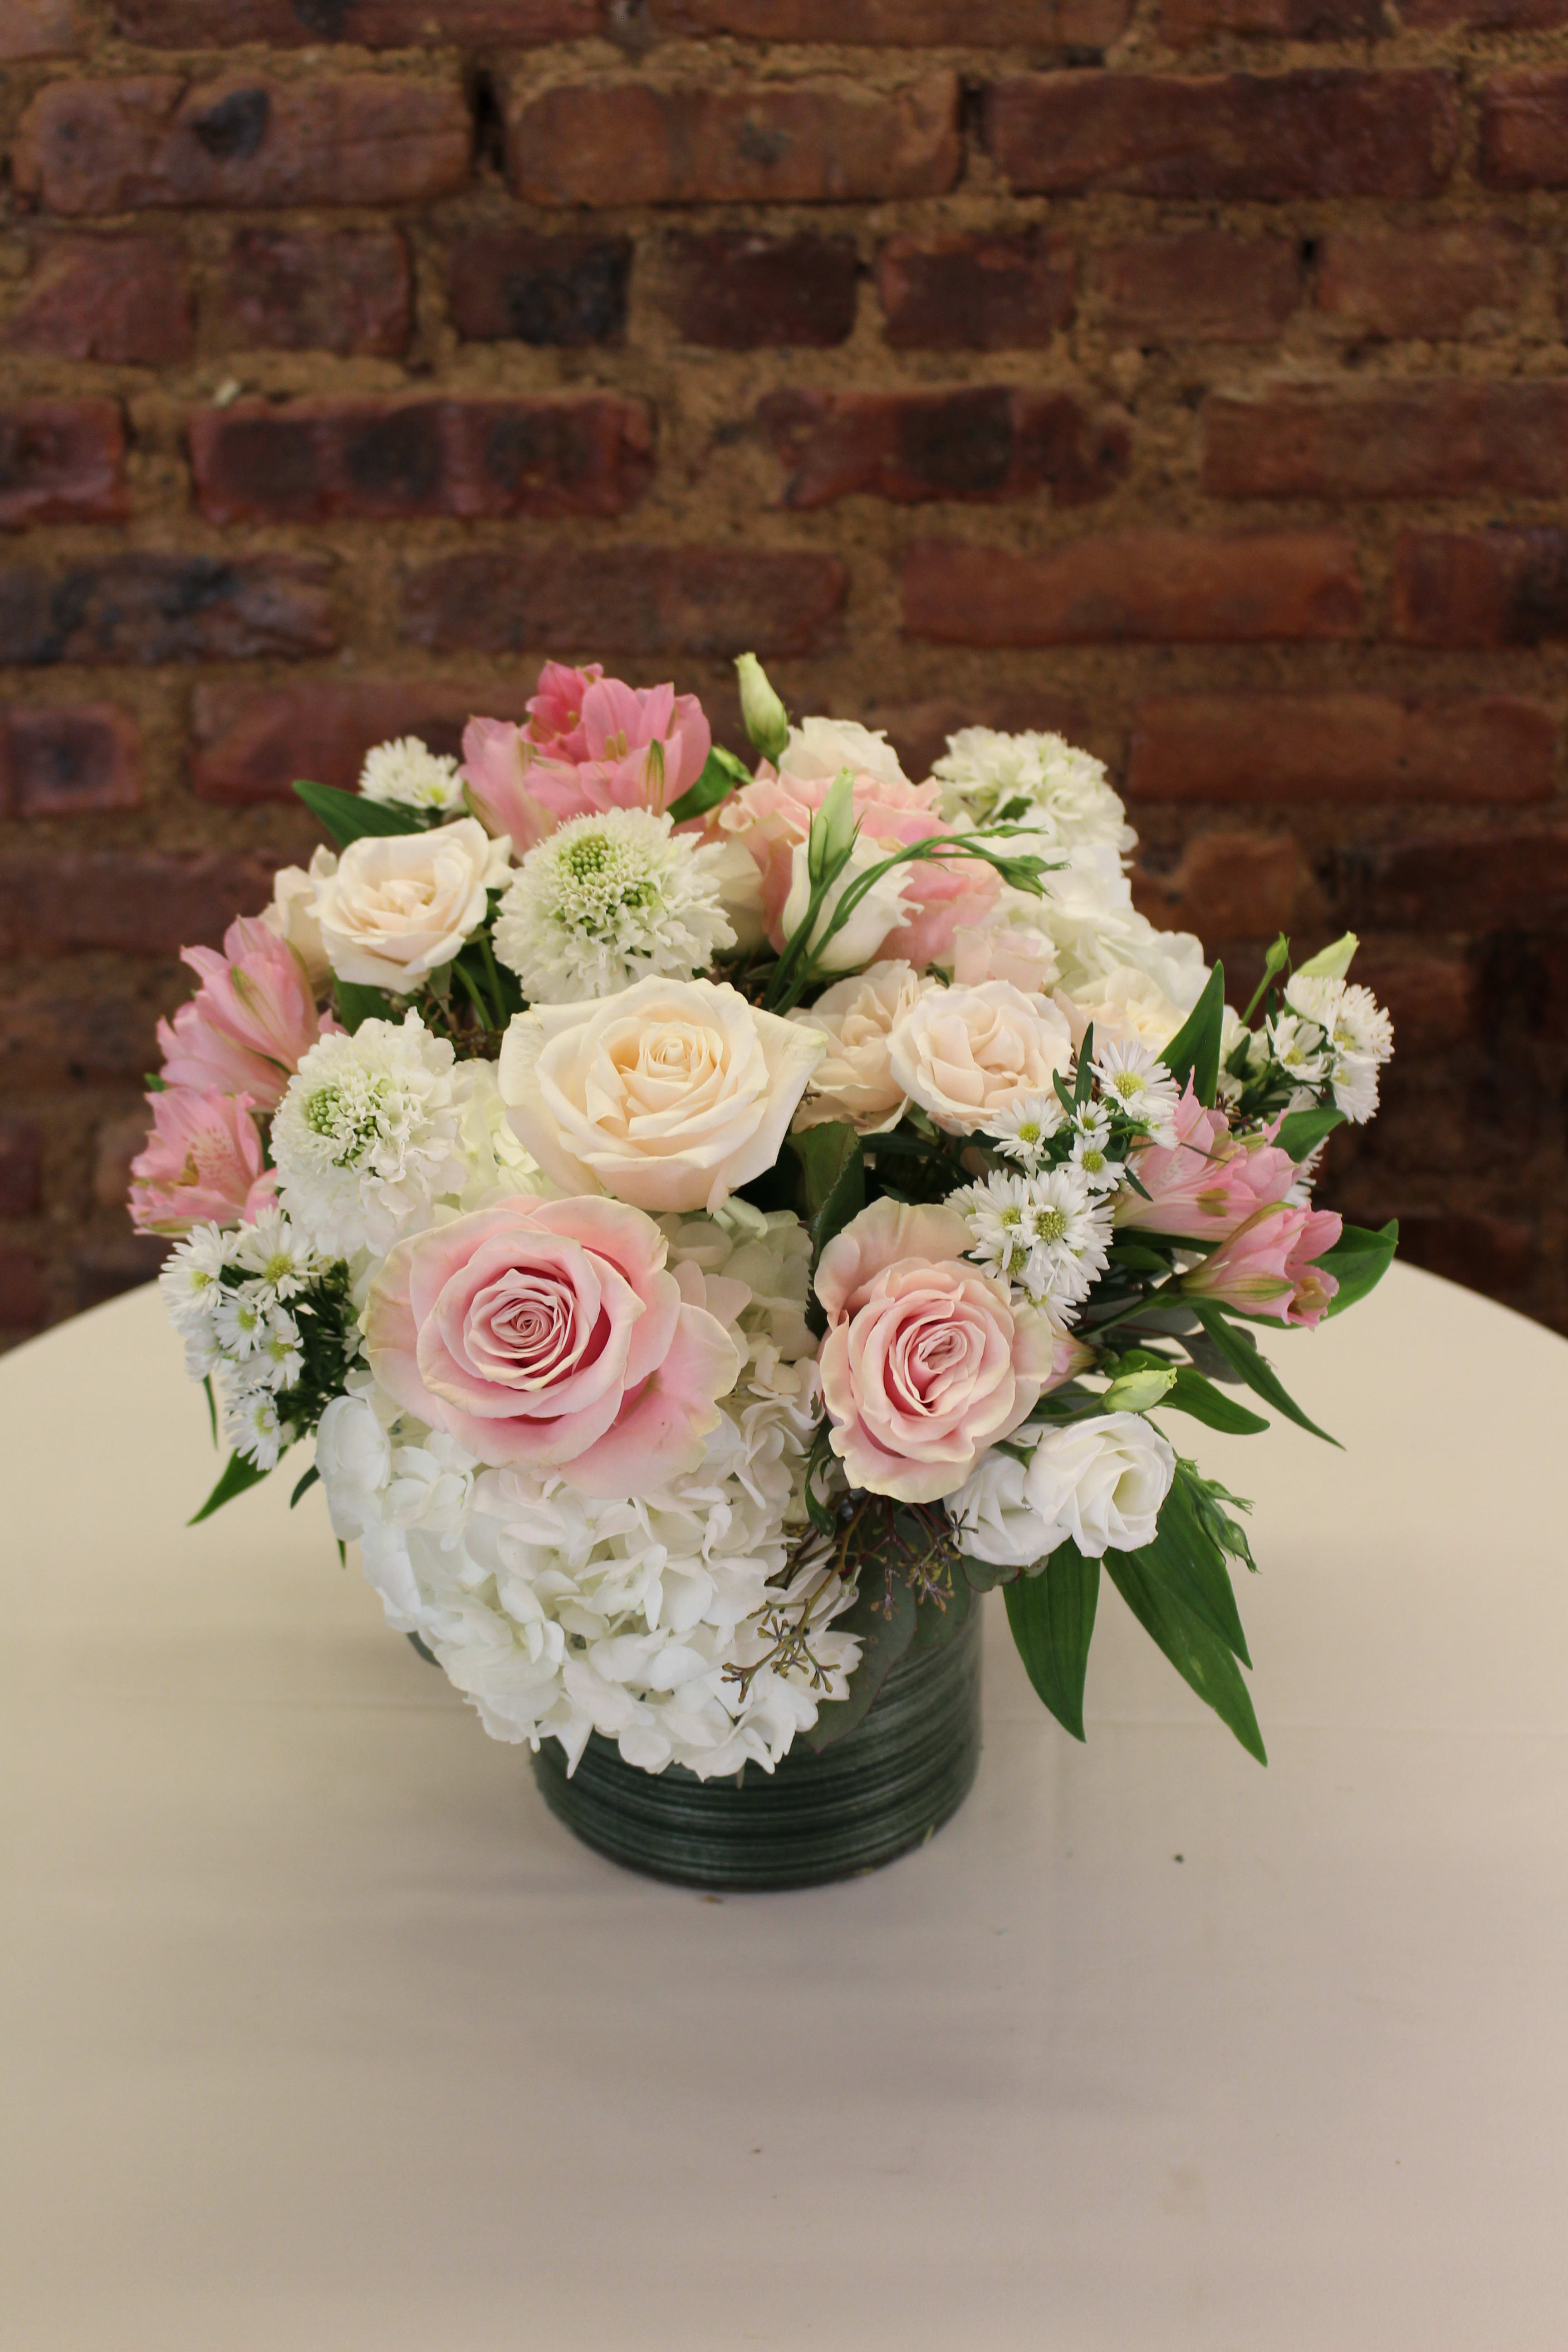 Pretty Pinks - Enjoying an evening of friends and family? Invite this Pretty Gal over to add some elegance and grace with creams, whites and light pinks, that will caress your soft side  Orientation: All-Around All prices in USD ($) Standard - (SHOWN), Deluxe, Premium